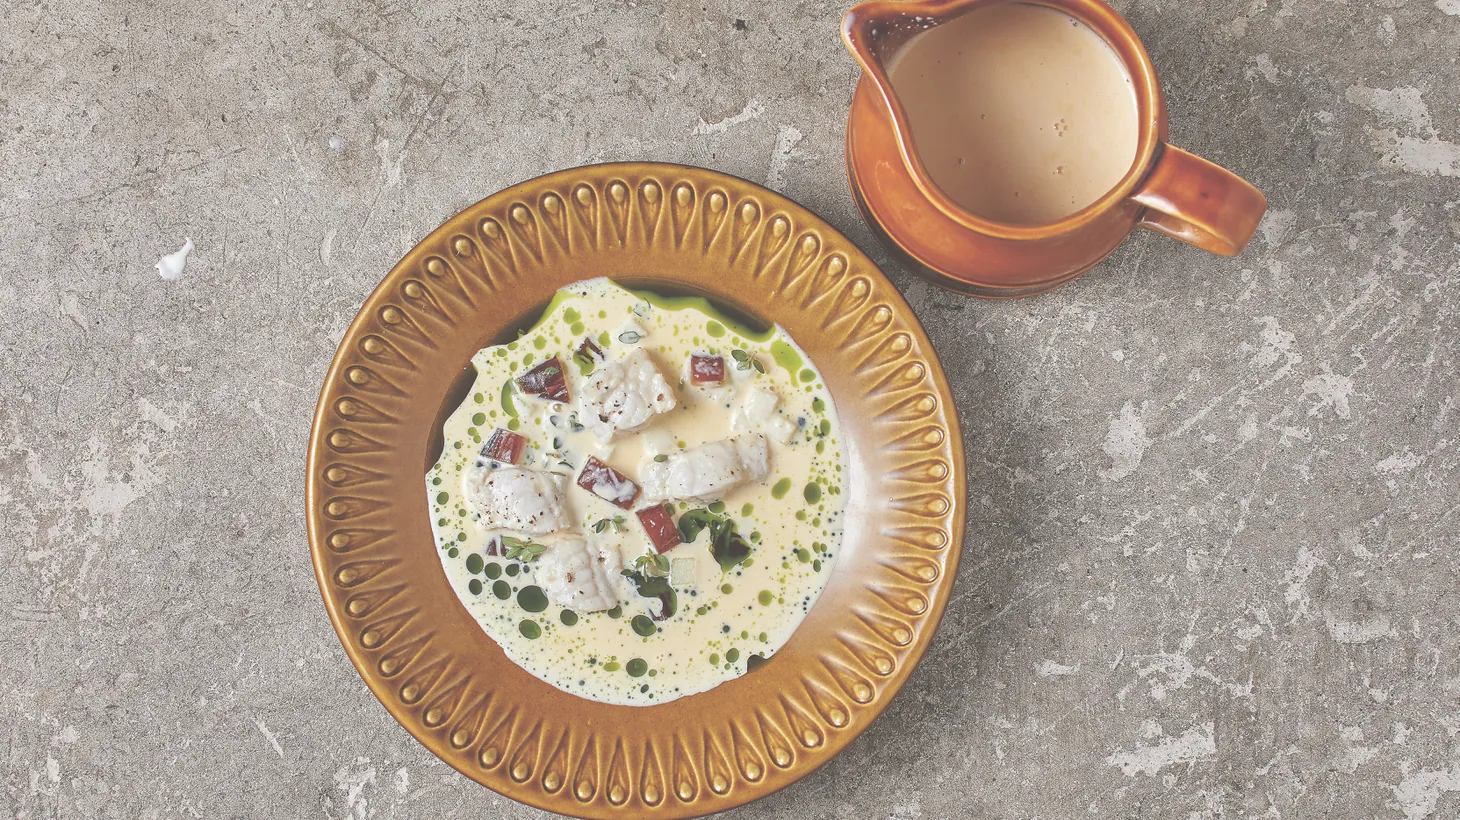 Gísli Matt honors his grandmother and Icelandic food traditions with his recipe for halibut soup.